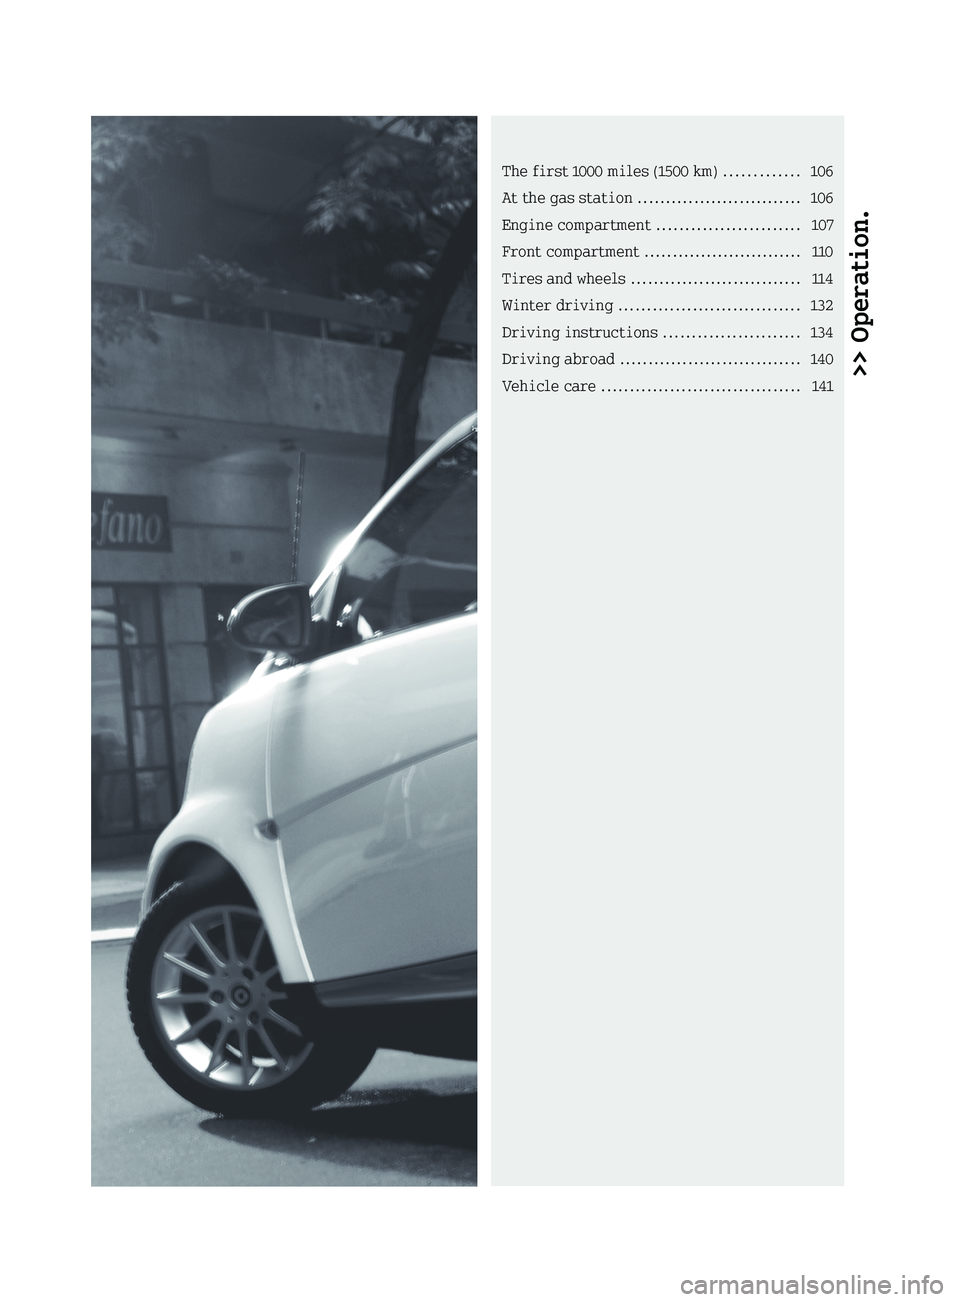 SMART FORTWO COUPE 2010  Owners Manual >> Operation.The first 1000 miles (1500 km) .............106
At the gas station  ............................. 106
Engine compartment  ......................... 107
Front compartment .................